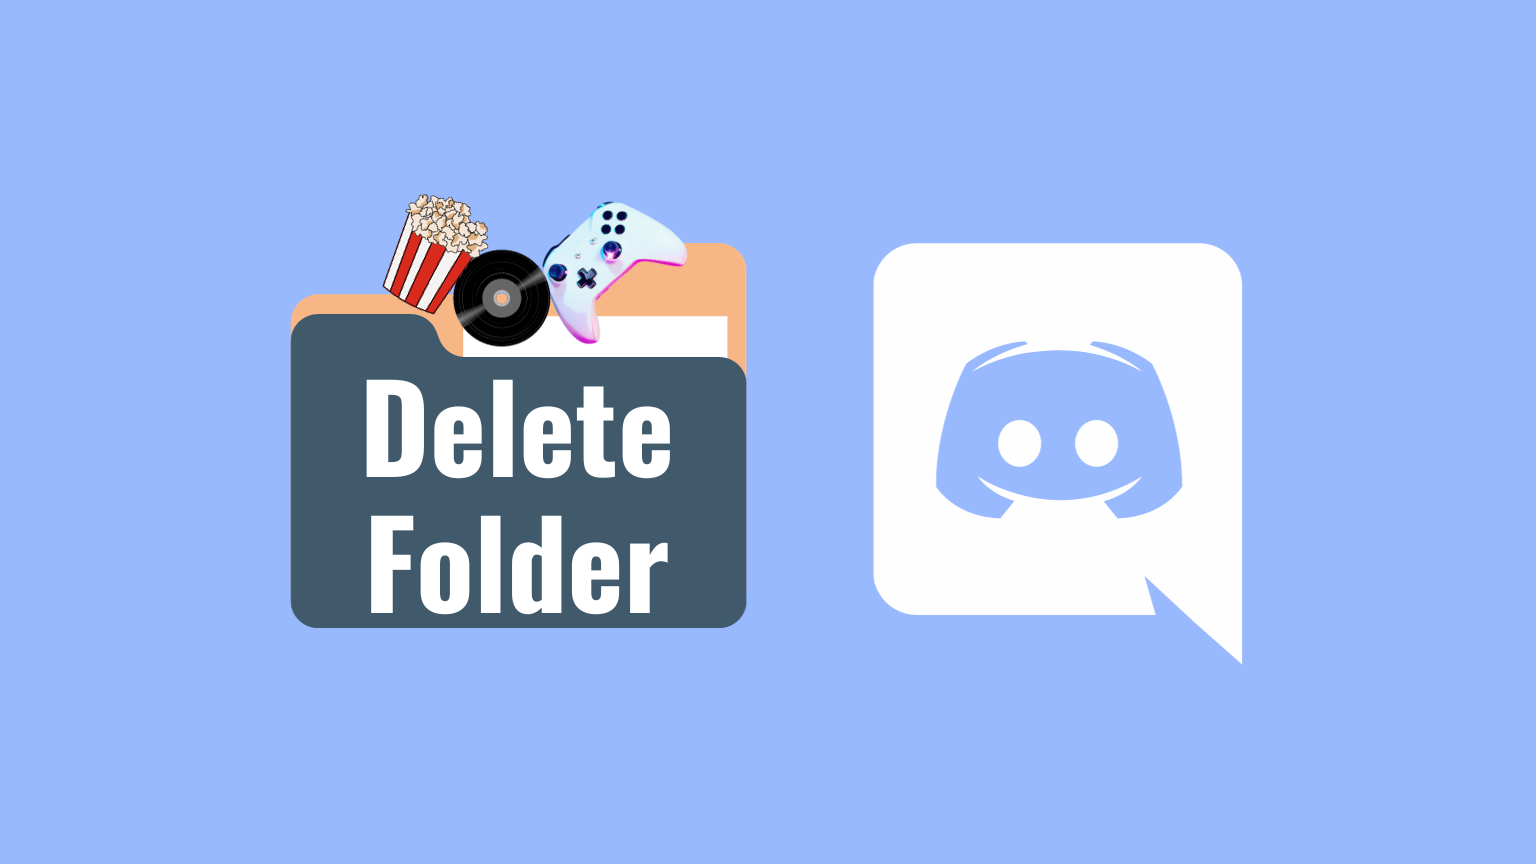 How to delete a folder in Discord